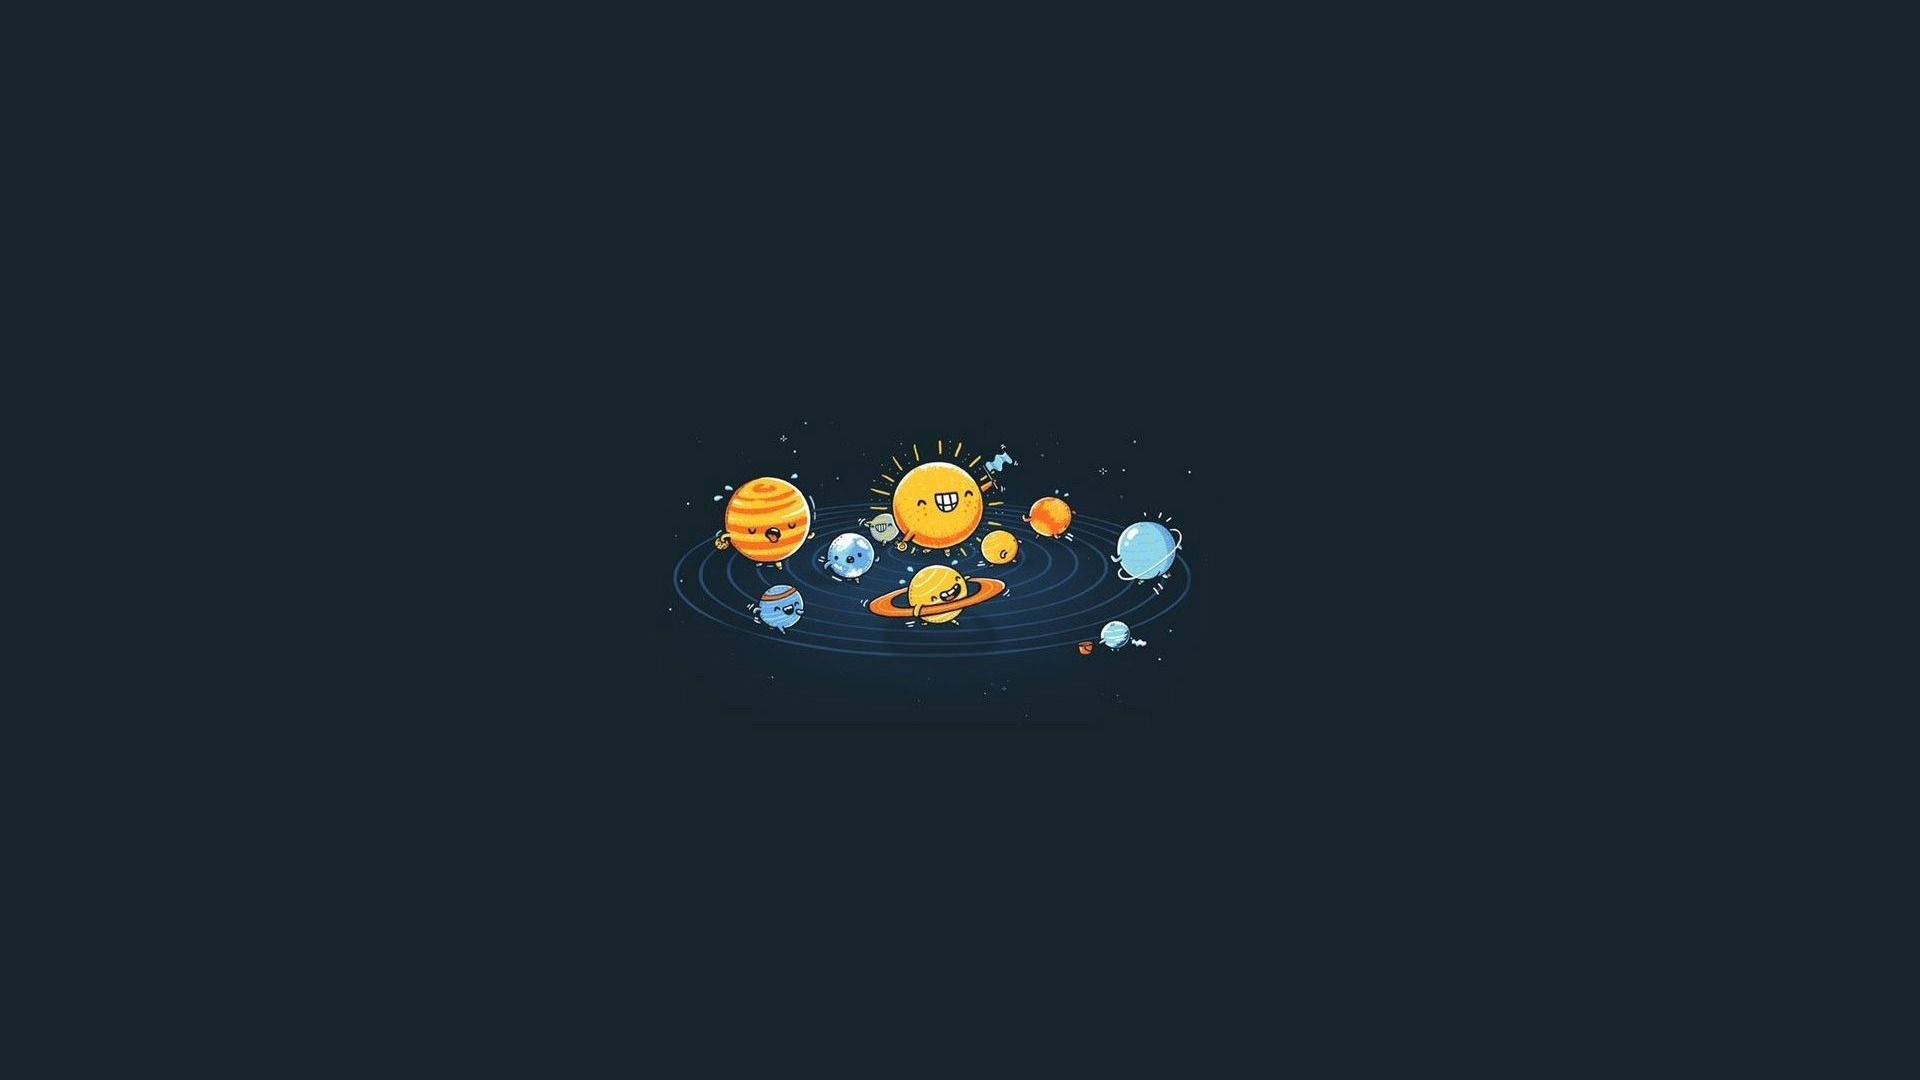 Solar System Hd Wallpaper - Pics about space